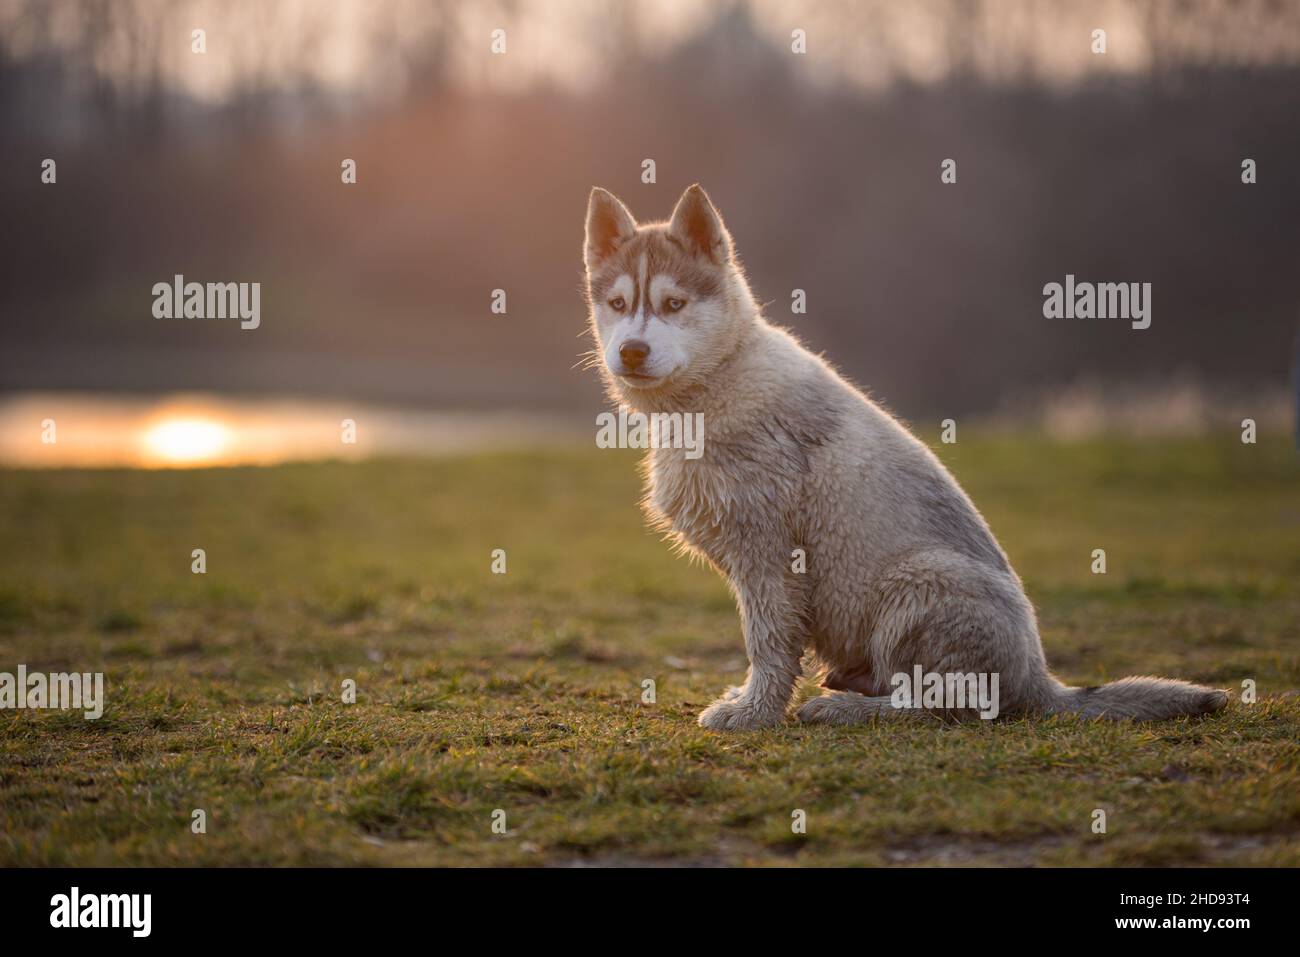 Puppy husky is walking around on the green dog meadow. The dog has bright blue eyes and a light coat with dark gray stripes Stock Photo